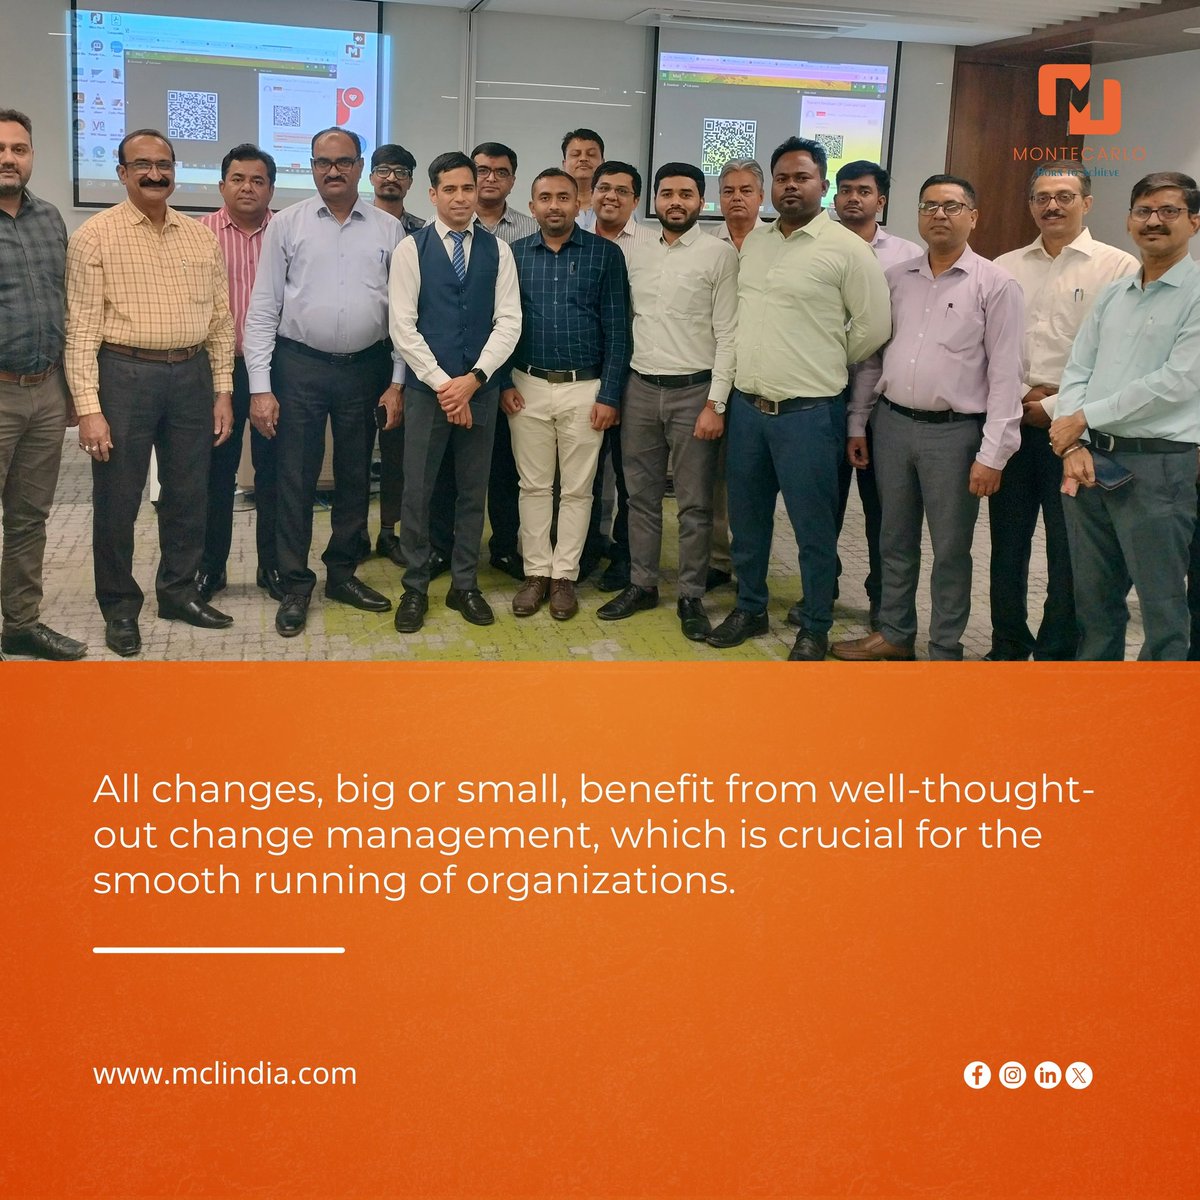 Embracing change for a brighter tomorrow! MCL recently hosted a seminar shedding light on the transformative power of change management for fostering flexibility and innovation.

#transforminglives #MakingADifference  #DevelopmentInIndia #buildingthenation #employeeengagement